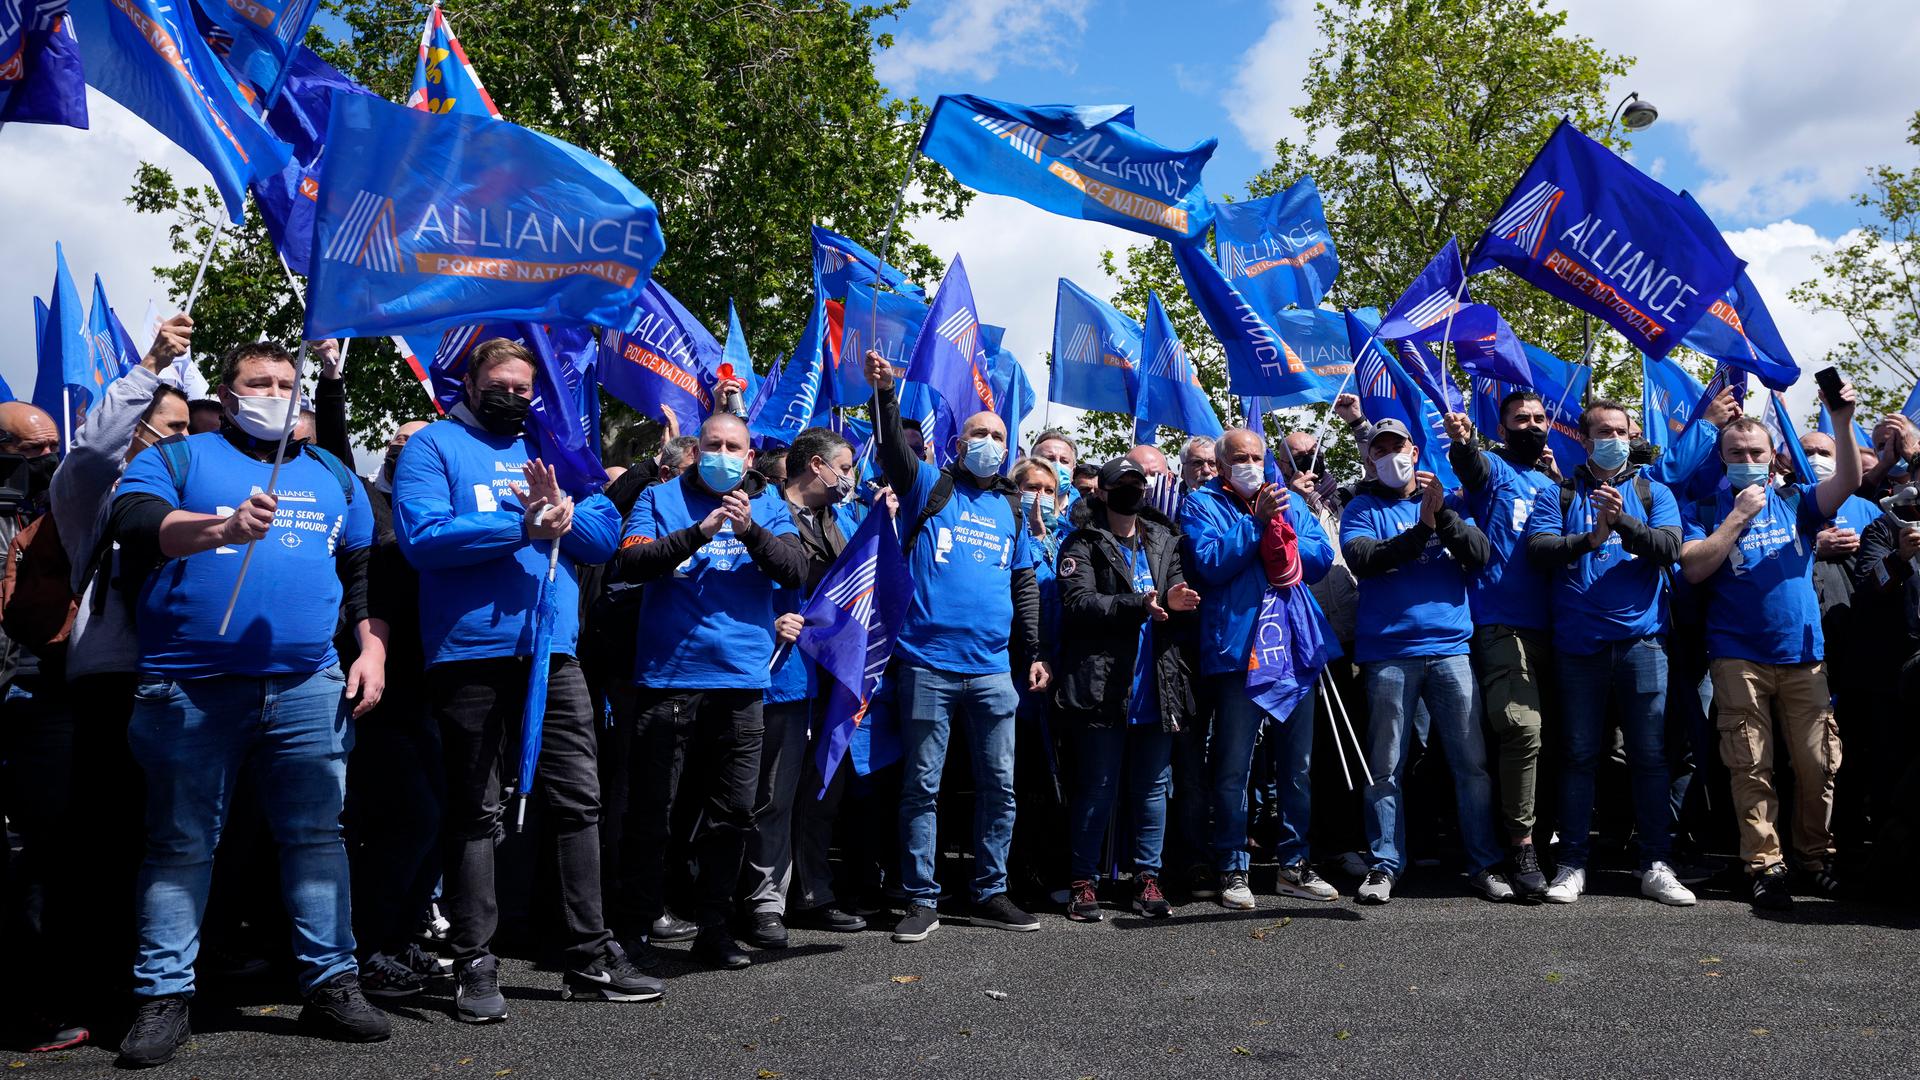 French police officers wearing blue shirts and waving blue flags demonstrate Wednesday, May 19, 2021 in Paris. French police, feeling angry, vulnerable to attacks and useless